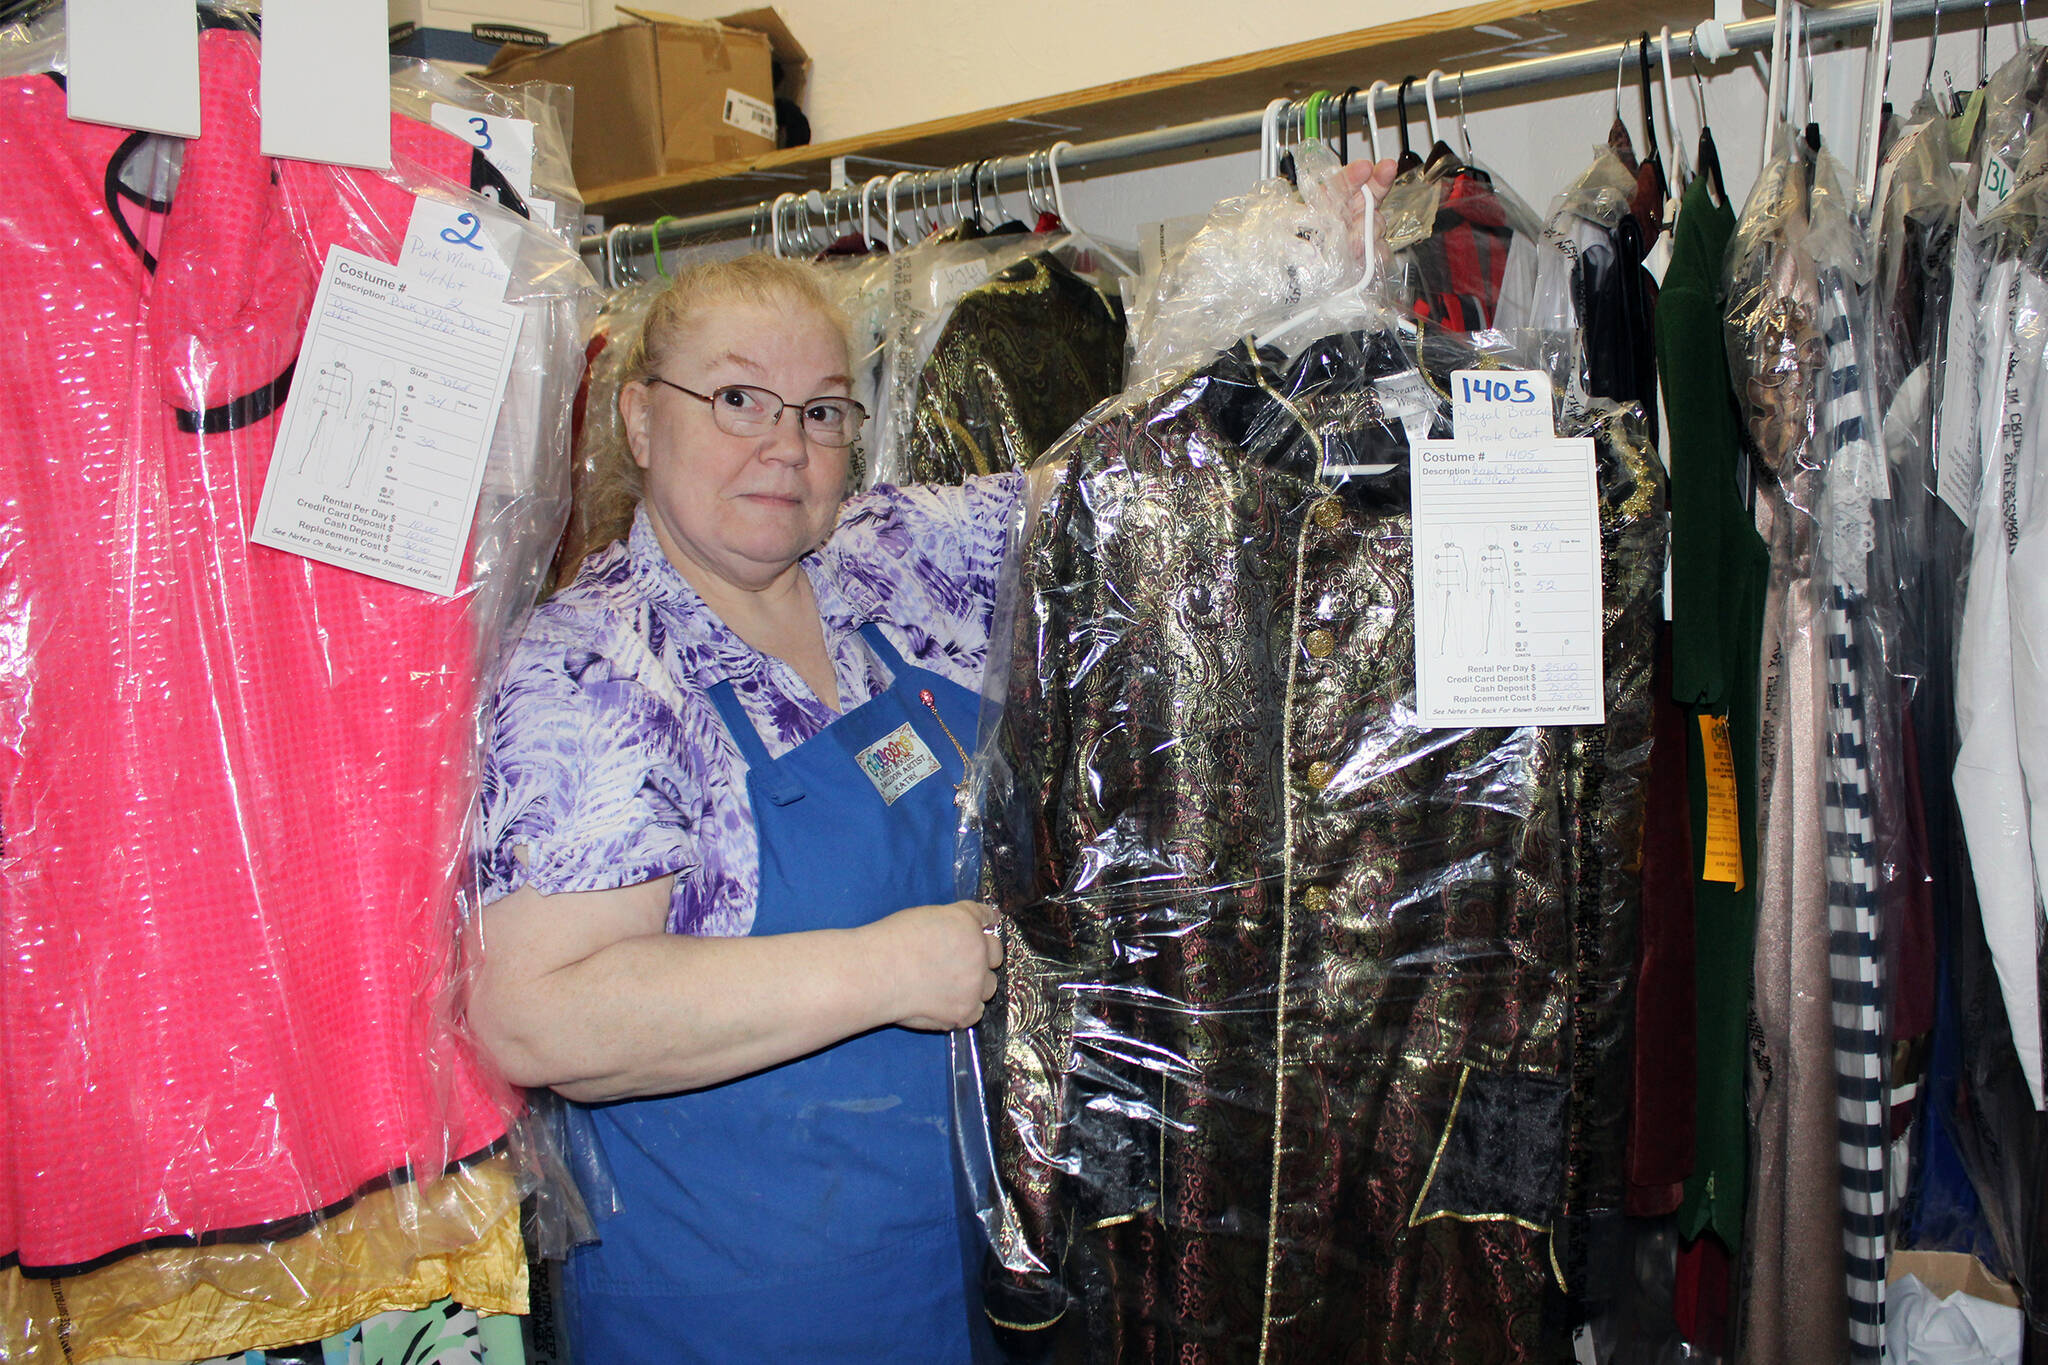 Kathy Buell, owner of Balloons by Night Moods, shows off a pirate costume on Oct. 27. The costume is one of more than 2,000 on hand for rental. (Dana Zigmund/Juneau Empire)